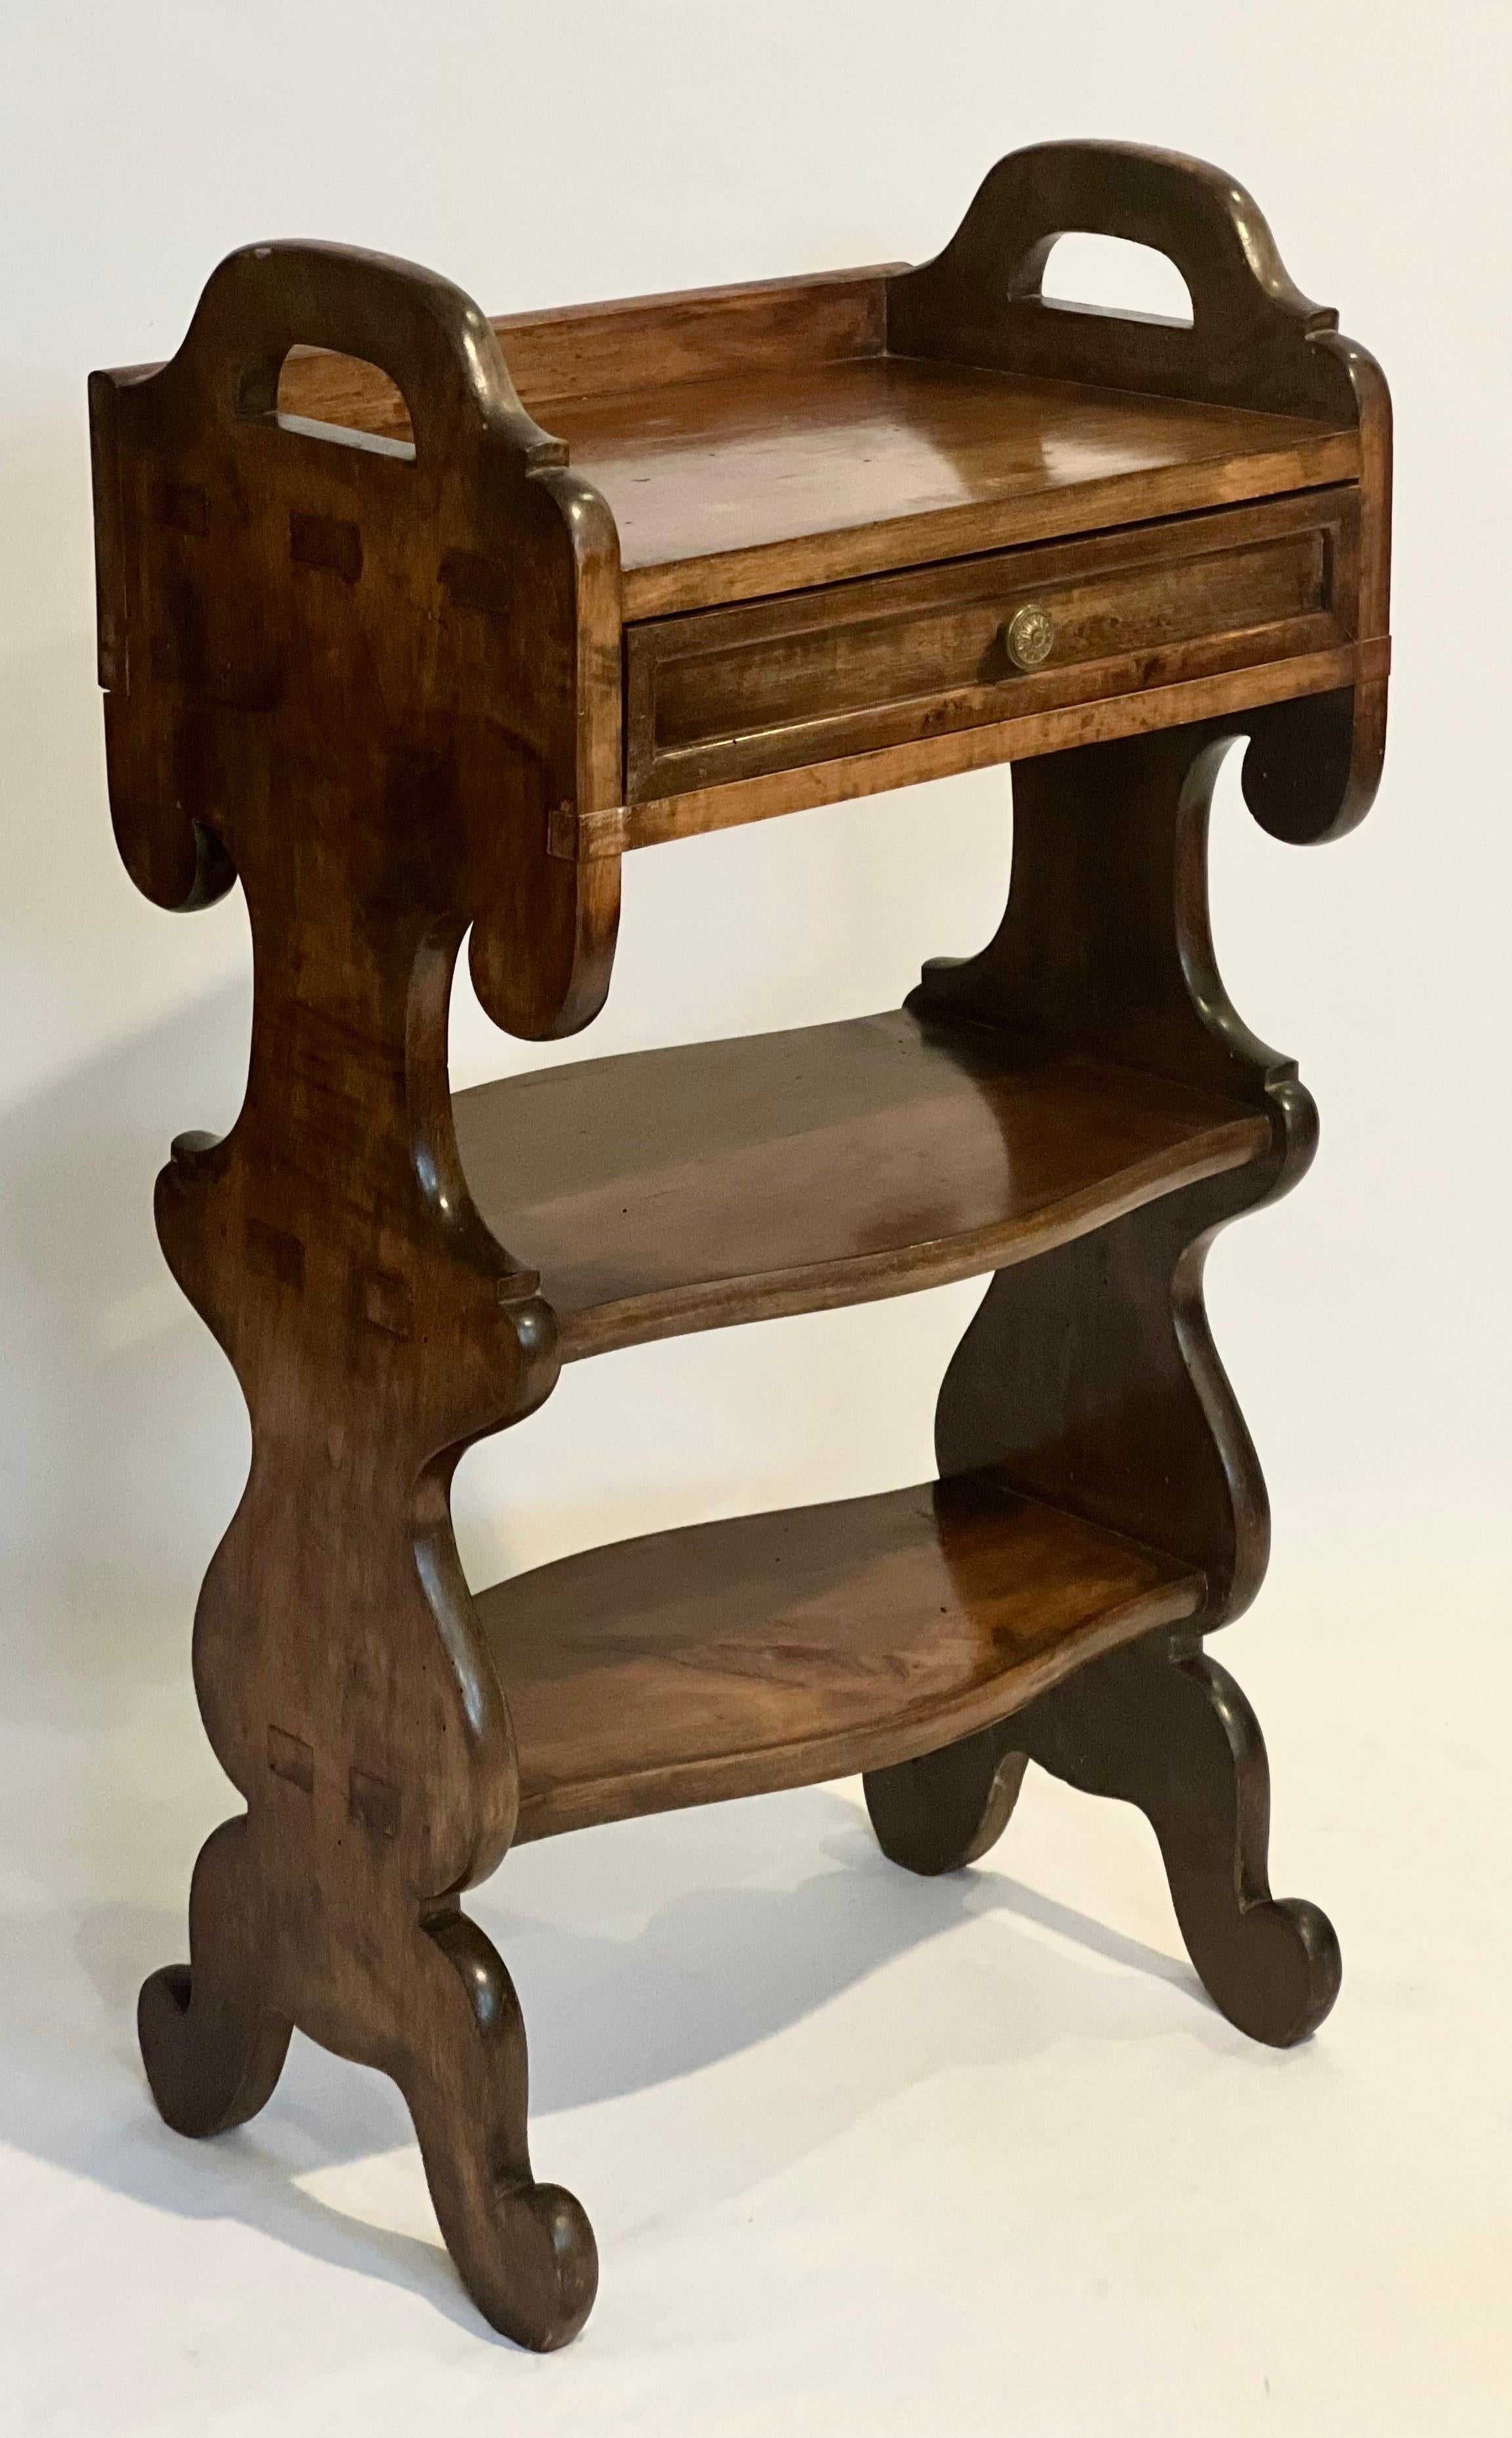 Unique Italian Renaissance style etagere stand, c. late 18th century.

A masterfully crafted stand of figured walnut featuring a single paneled drawer with a finished interior and two shelves between Renaissance style end supports. A beautifully